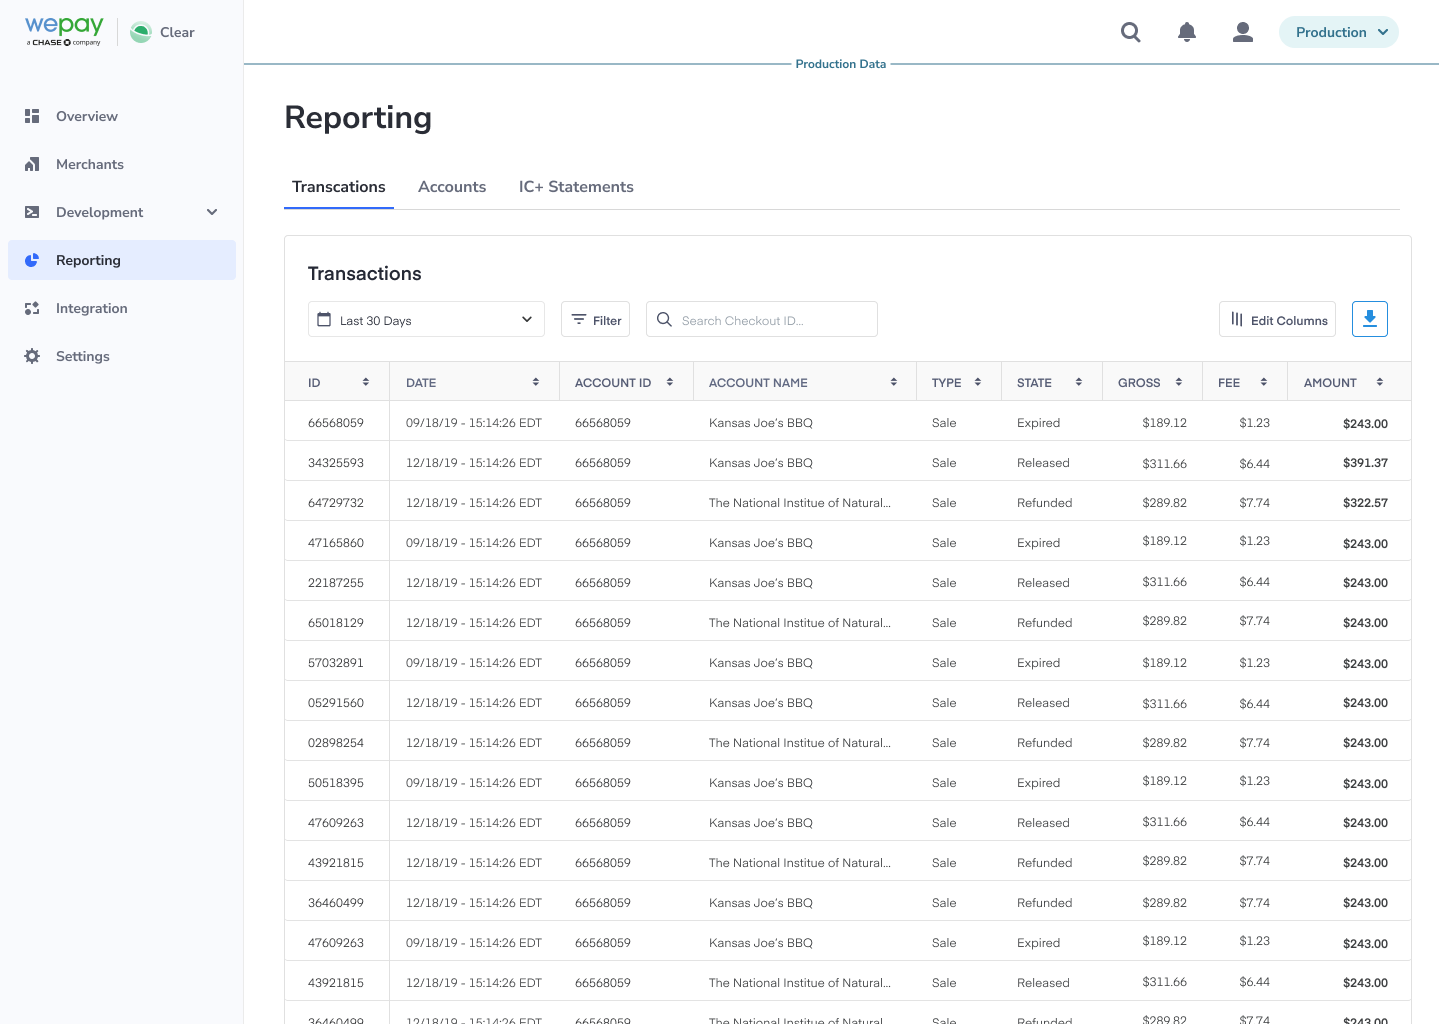 How to view transactions in the reporting tab